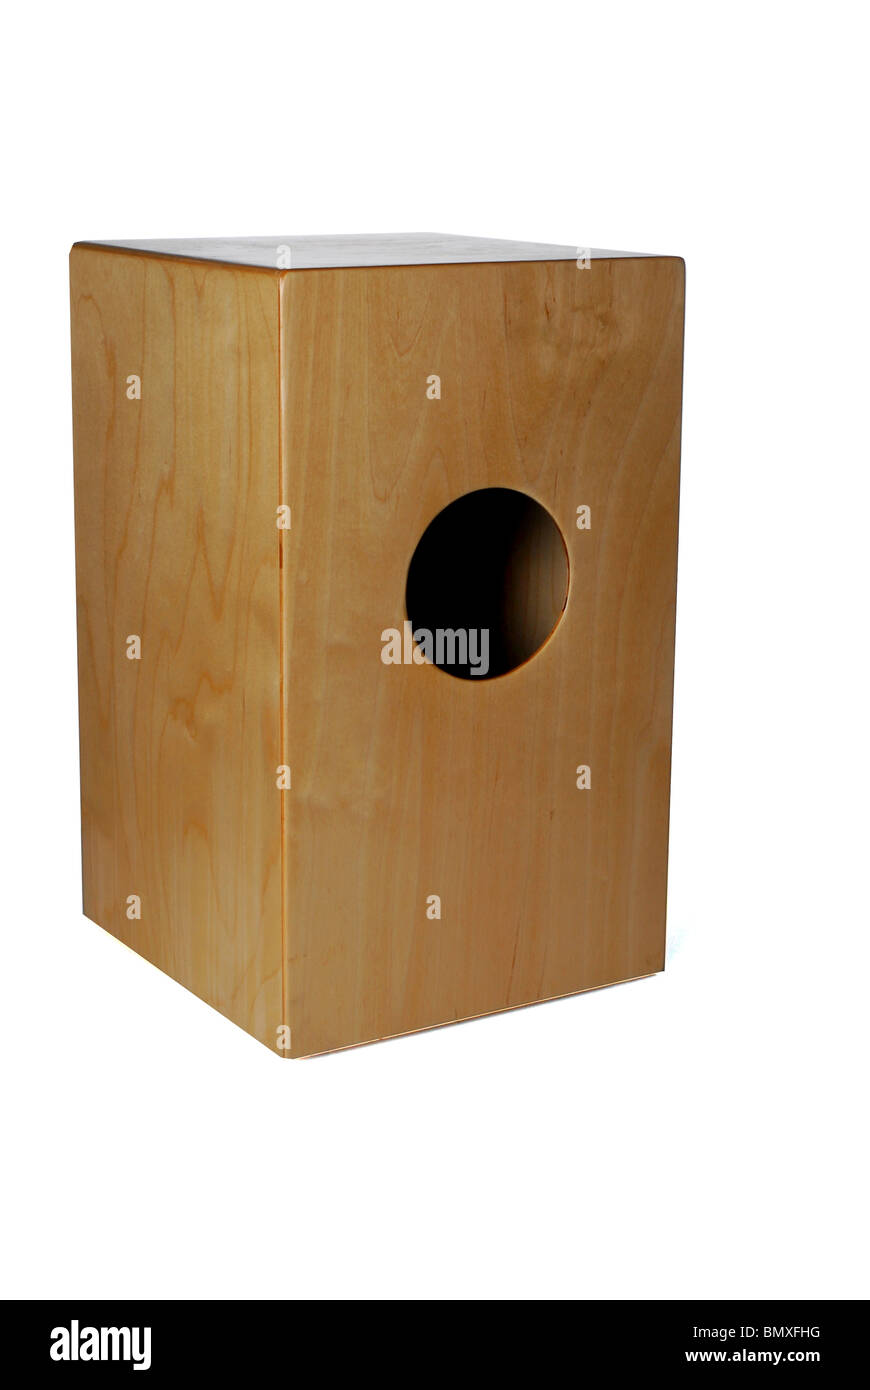 Cut out of a Cajon music instrument on white background Stock Photo